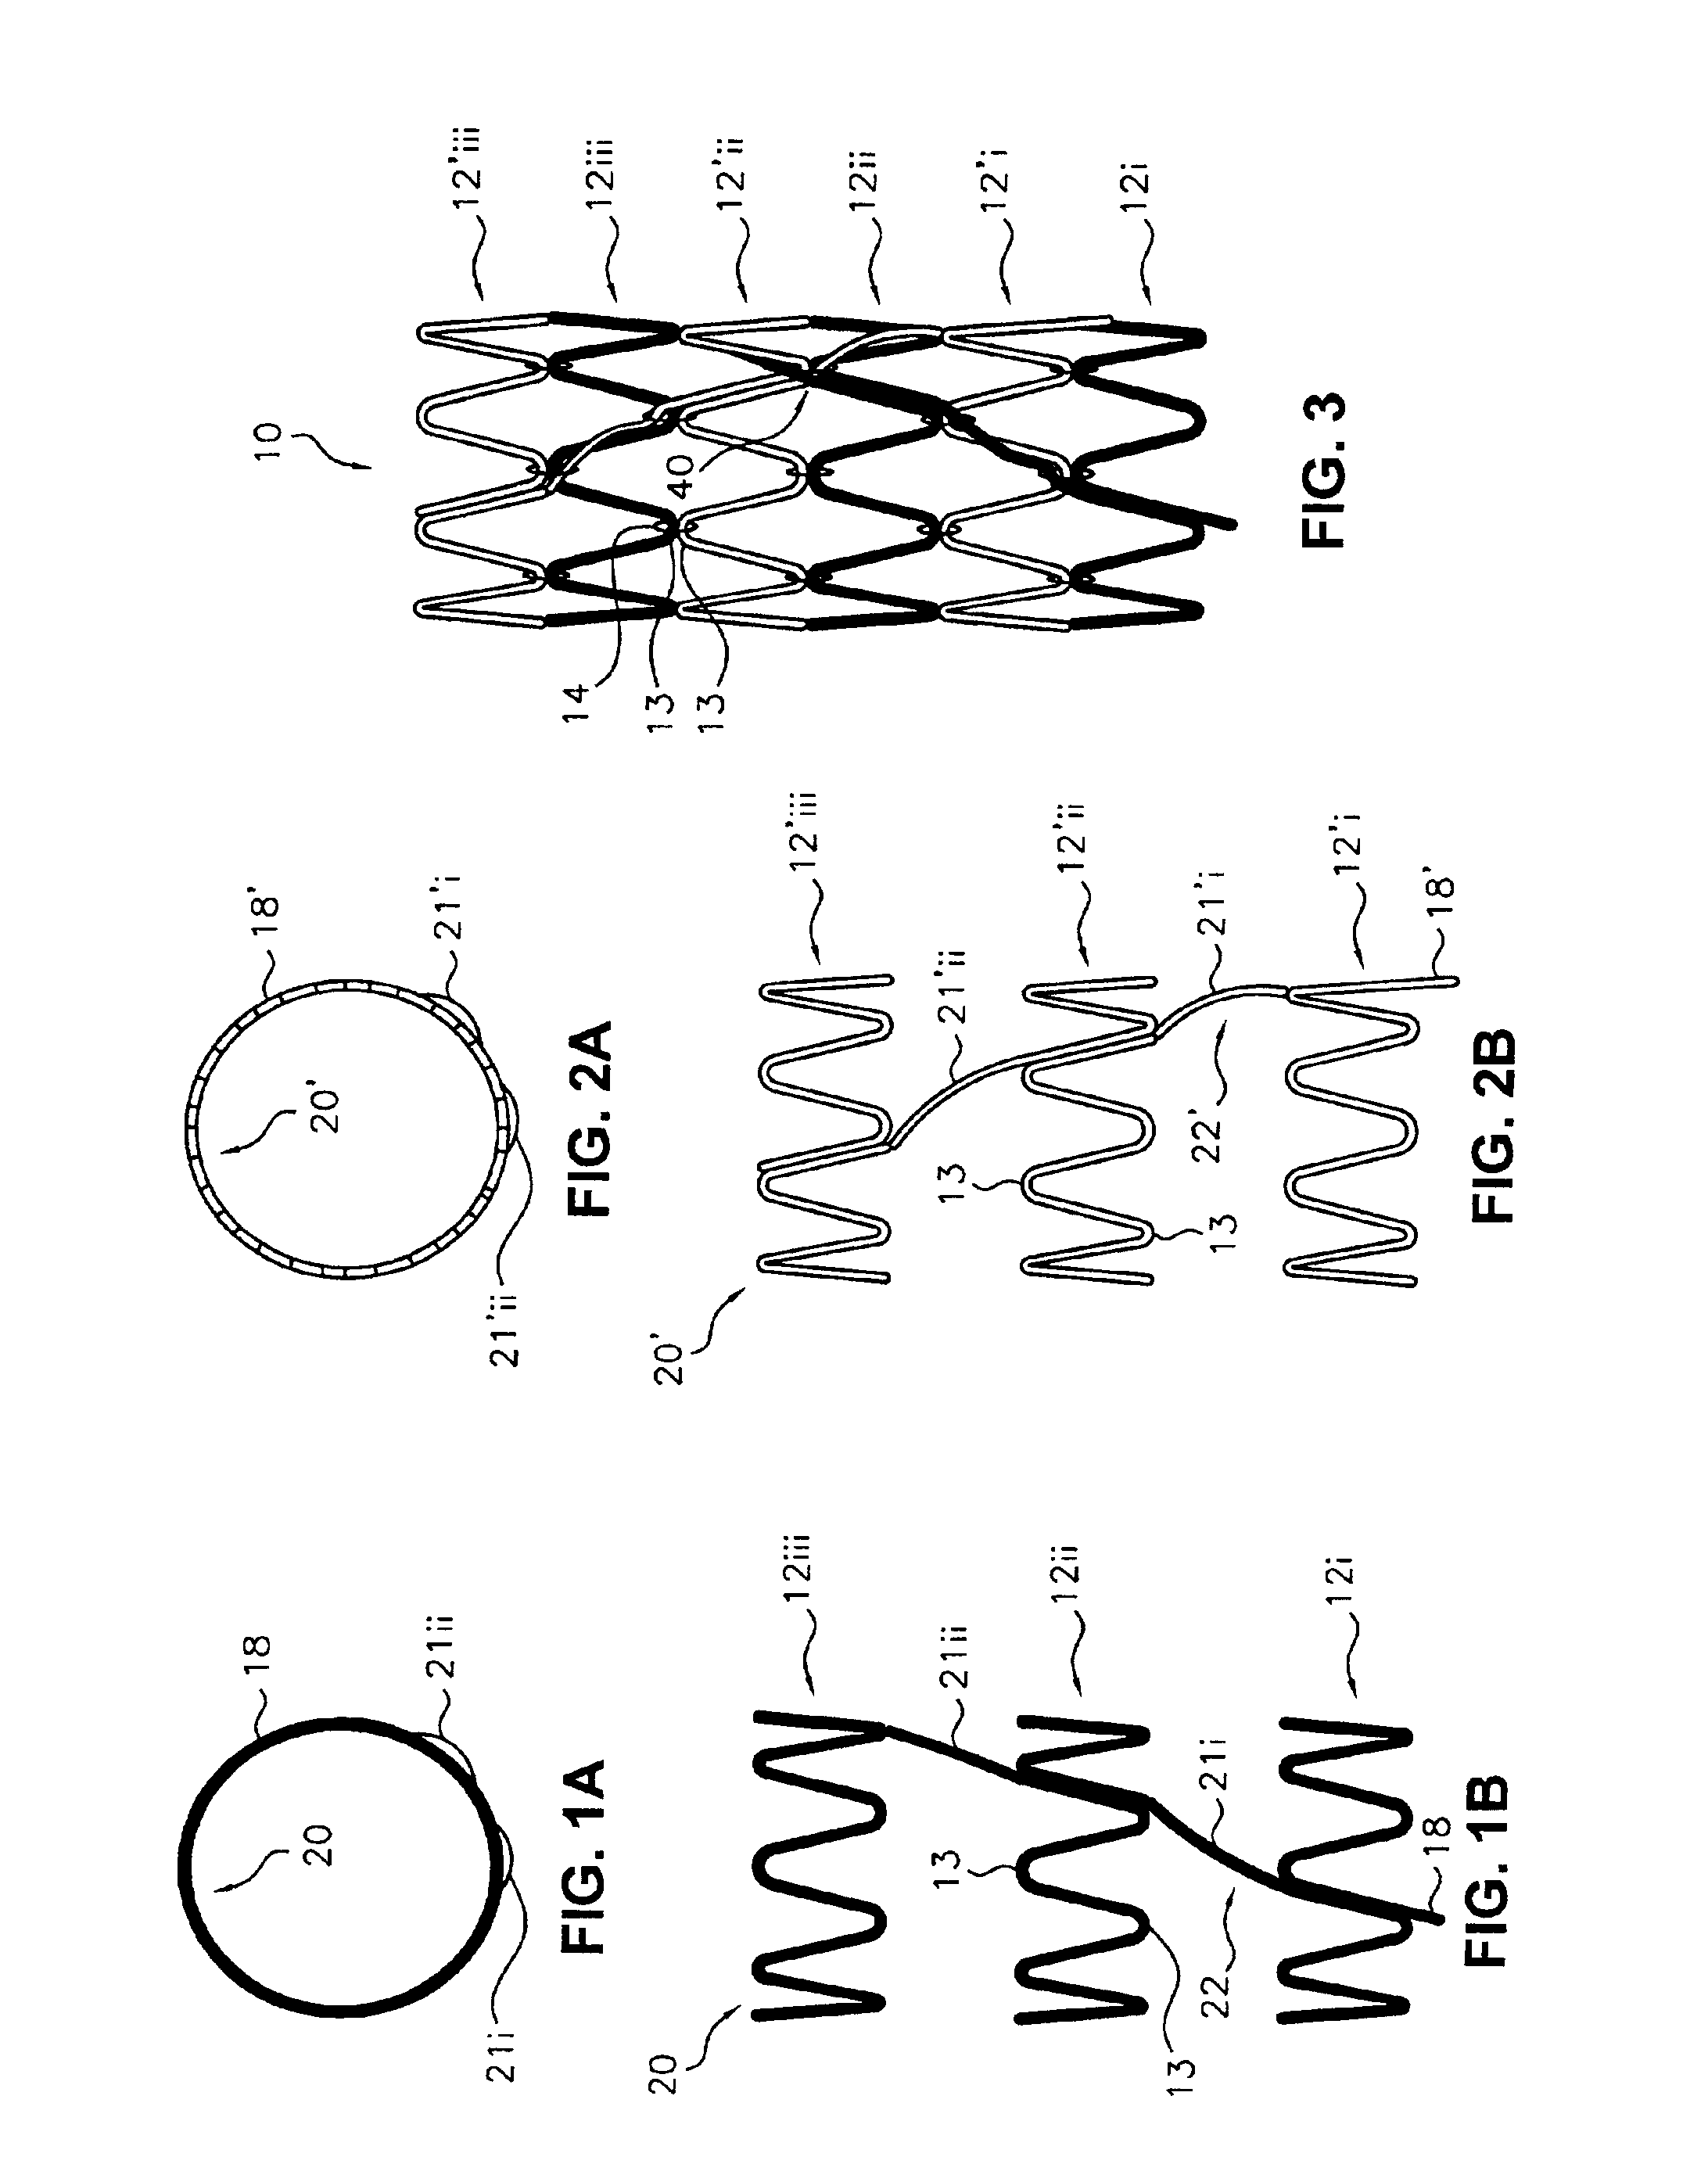 Flexible endoluminal stent and process of repairing a body lumen